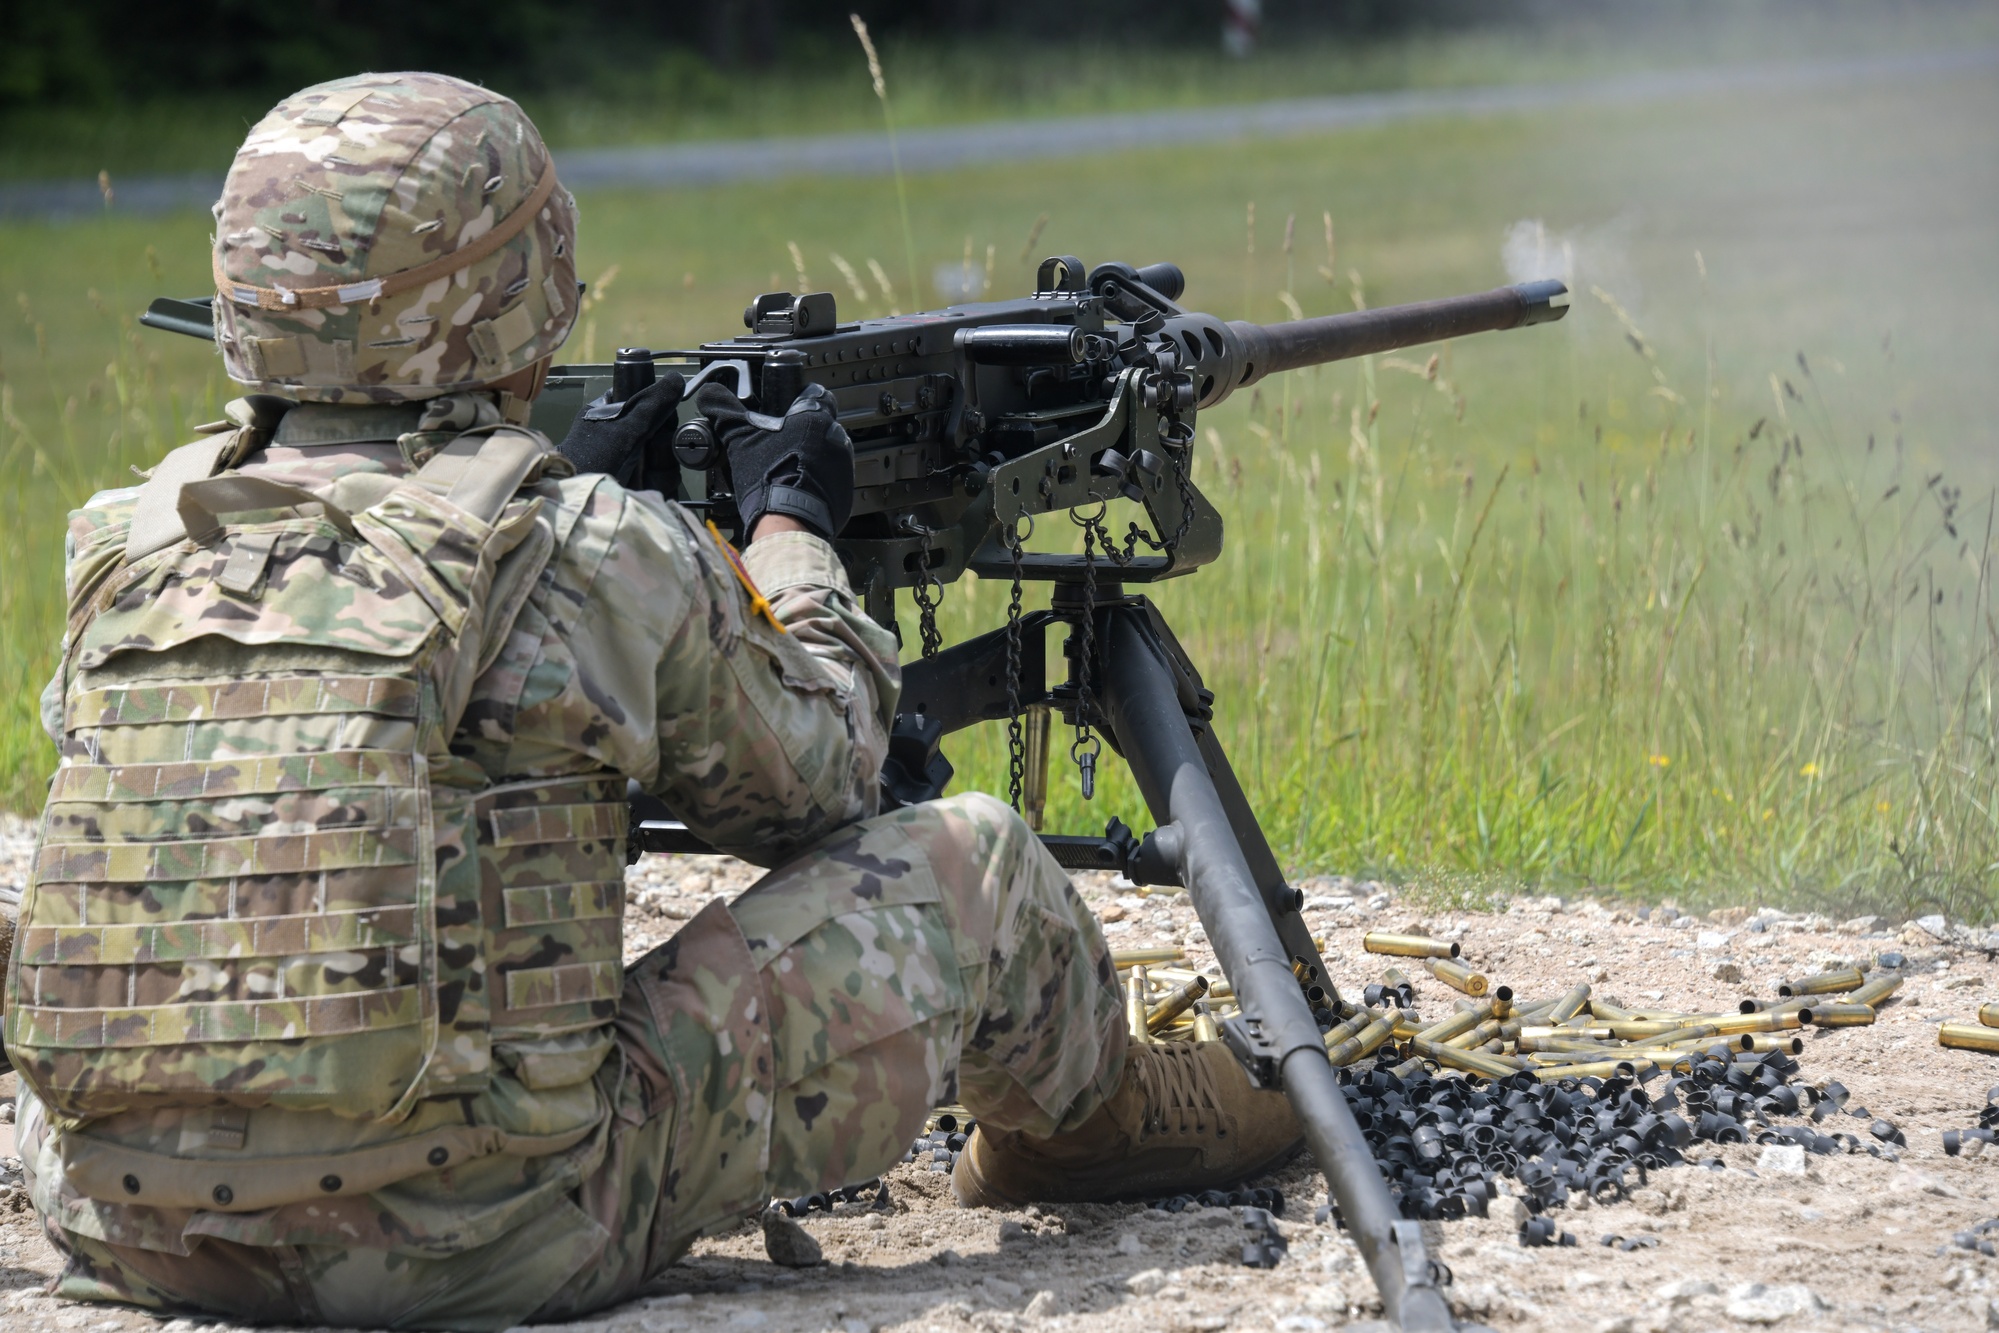 DVIDS - Images - M2A1 .50 Cal Qualification [Image 7 of 7]